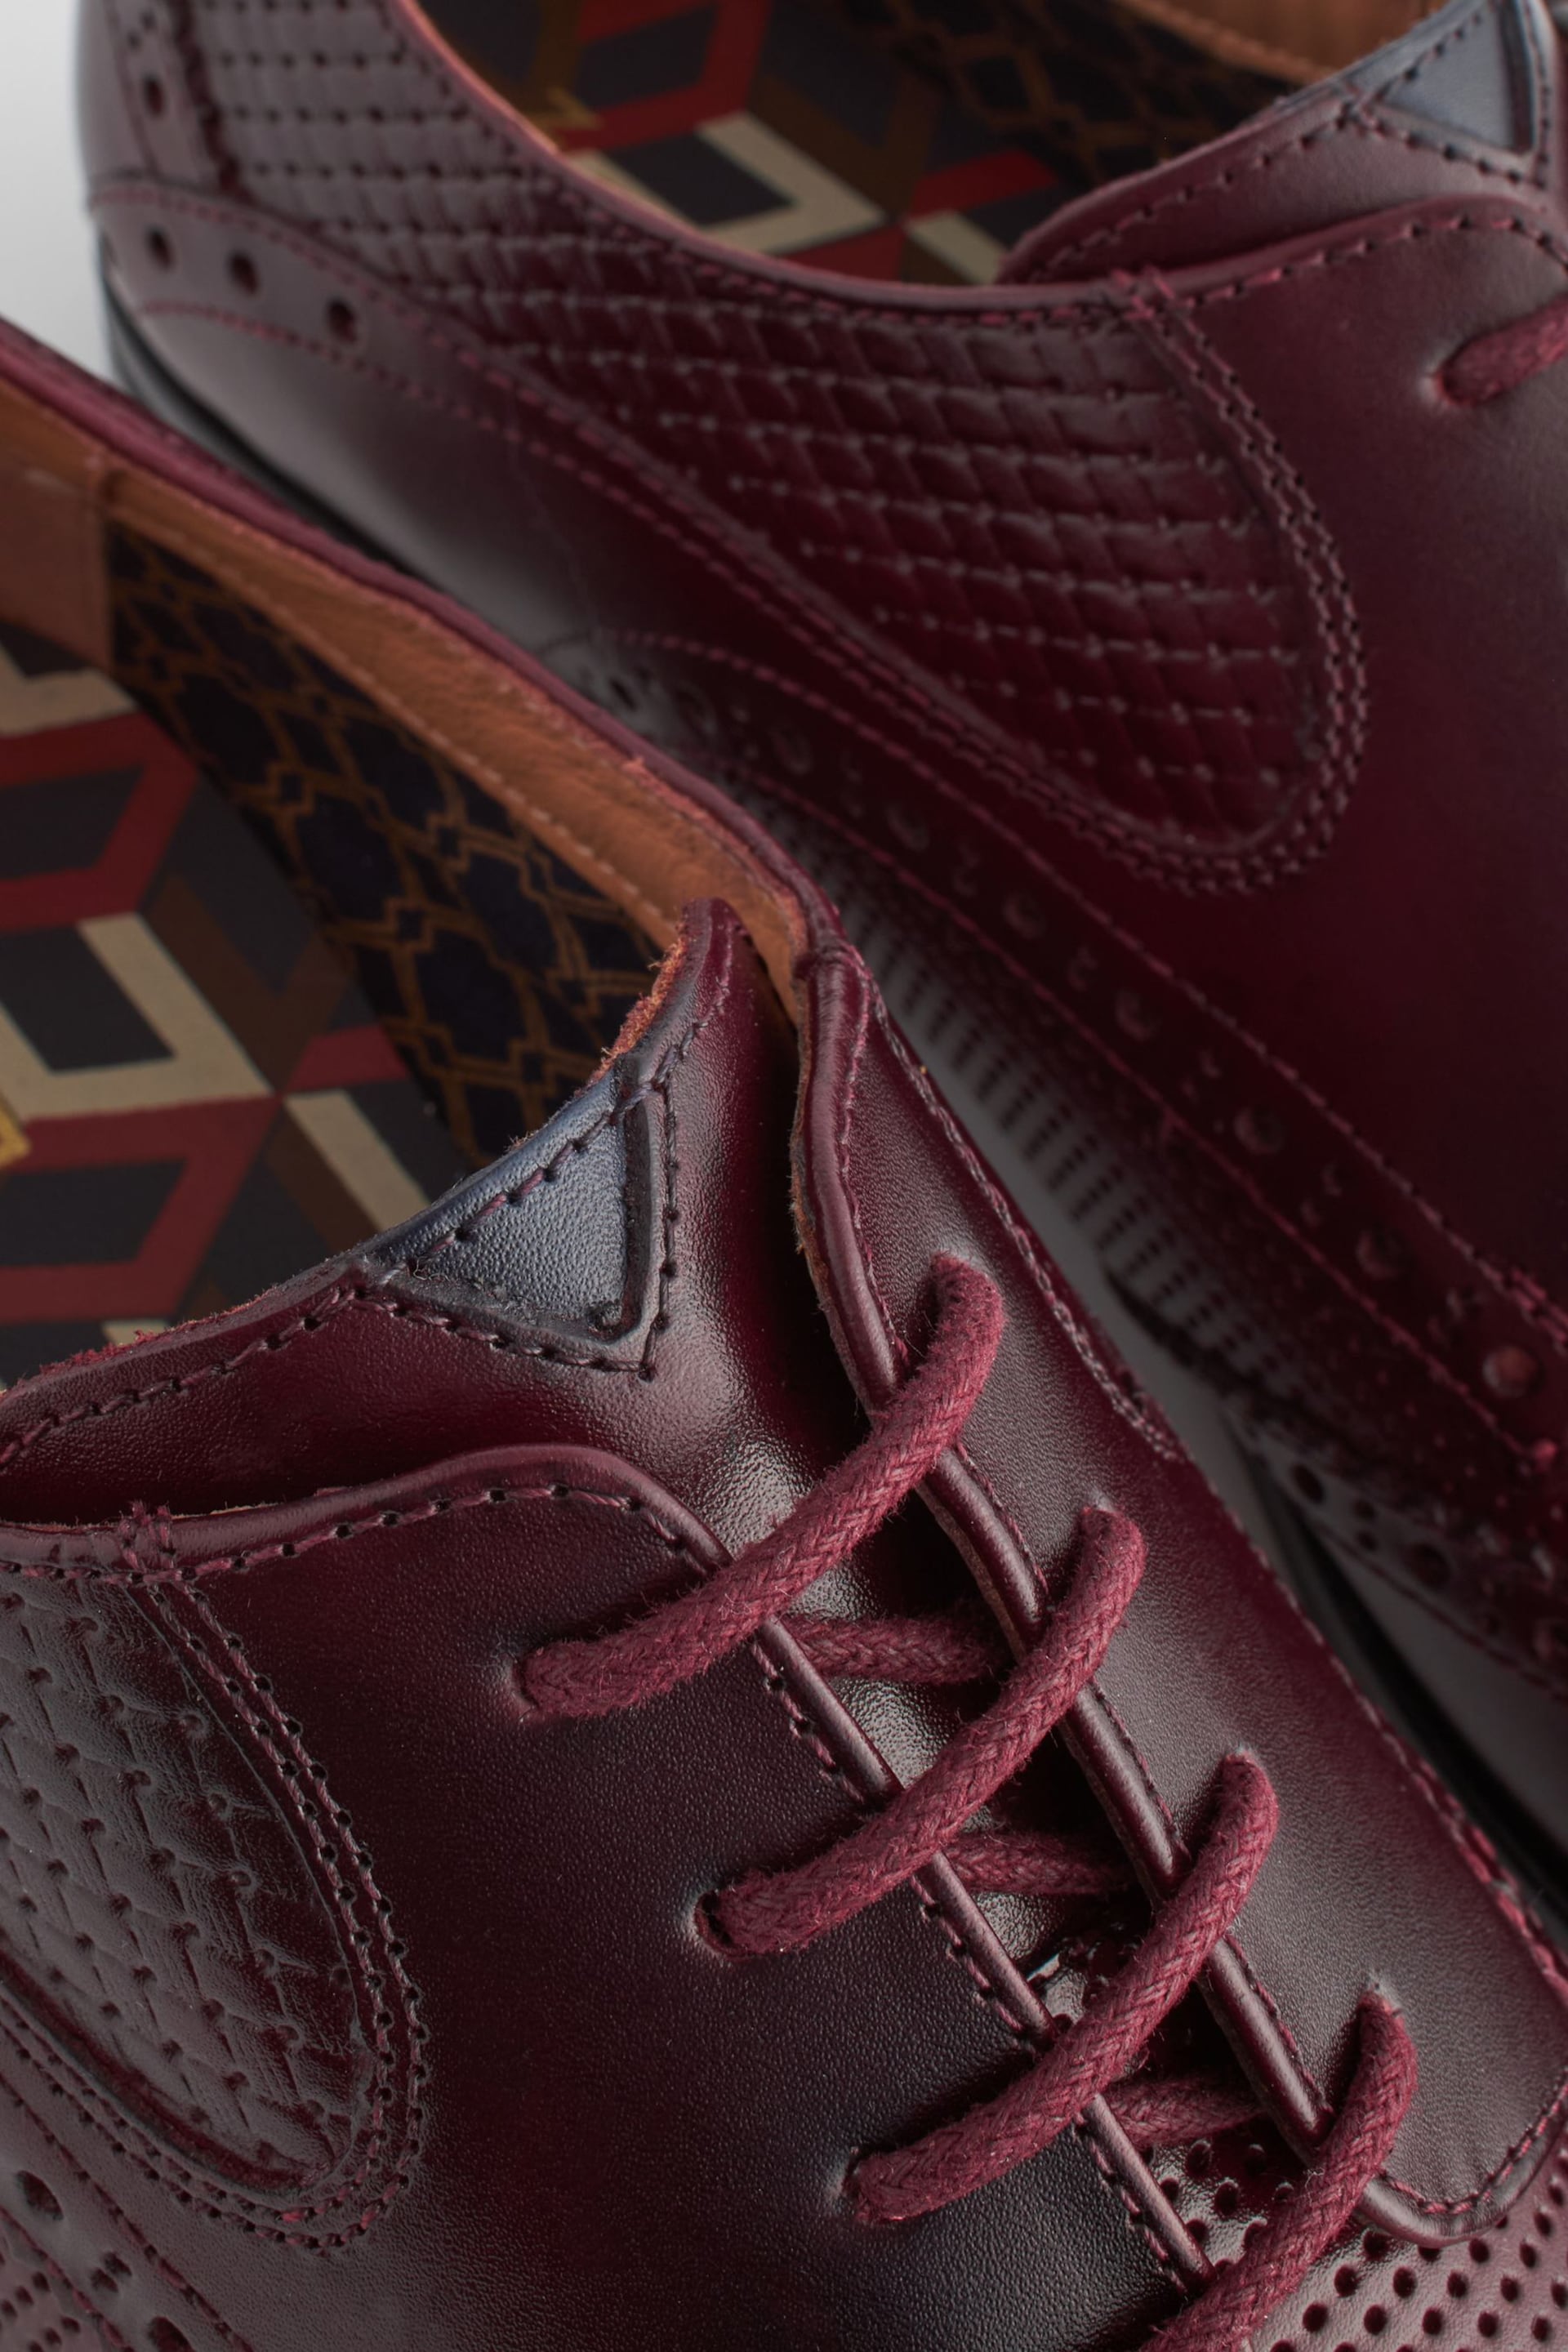 Burgundy Red Leather Embossed Wing Cap Brogues Shoes - Image 7 of 8